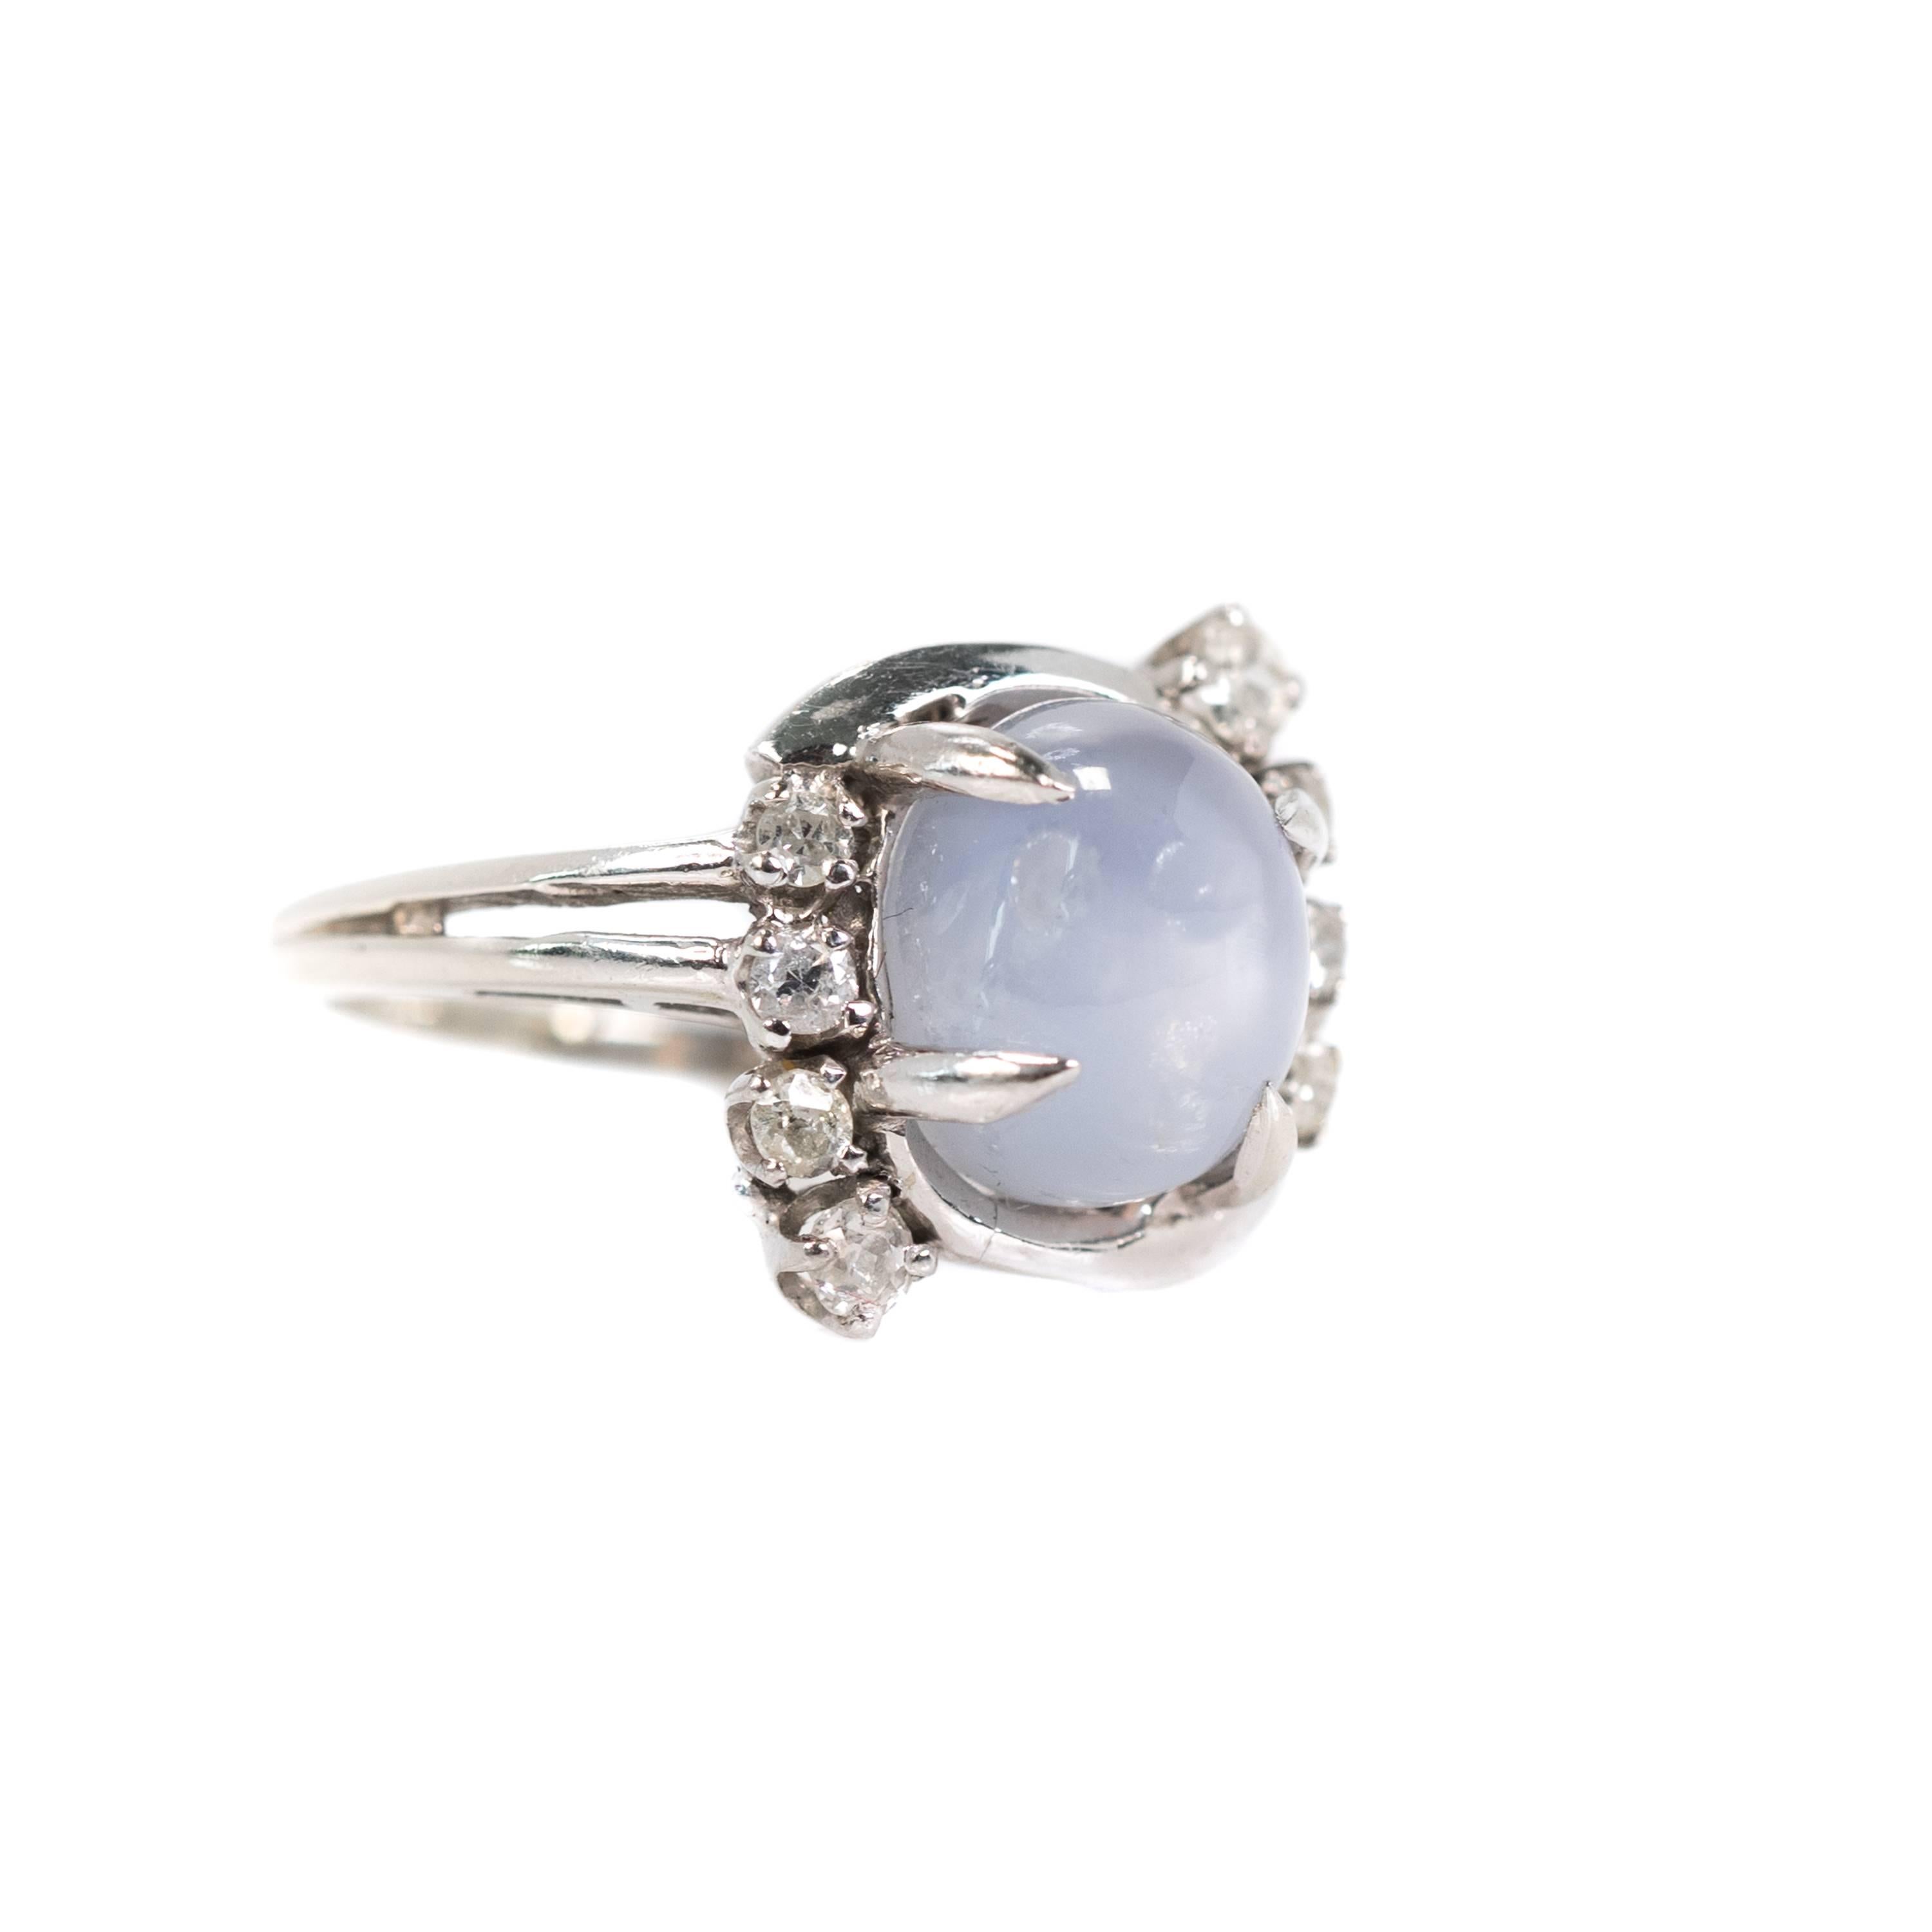 1920s Art Deco Star Sapphire Ring - 14k White Gold, Star Sapphire, Diamonds

Features a 3 carat Star Sapphire oval cabochon flanked by 8 single cut Old Mine Diamonds. 
The Star Sapphire is held securely in place by 4 long talon prongs. The sparkling